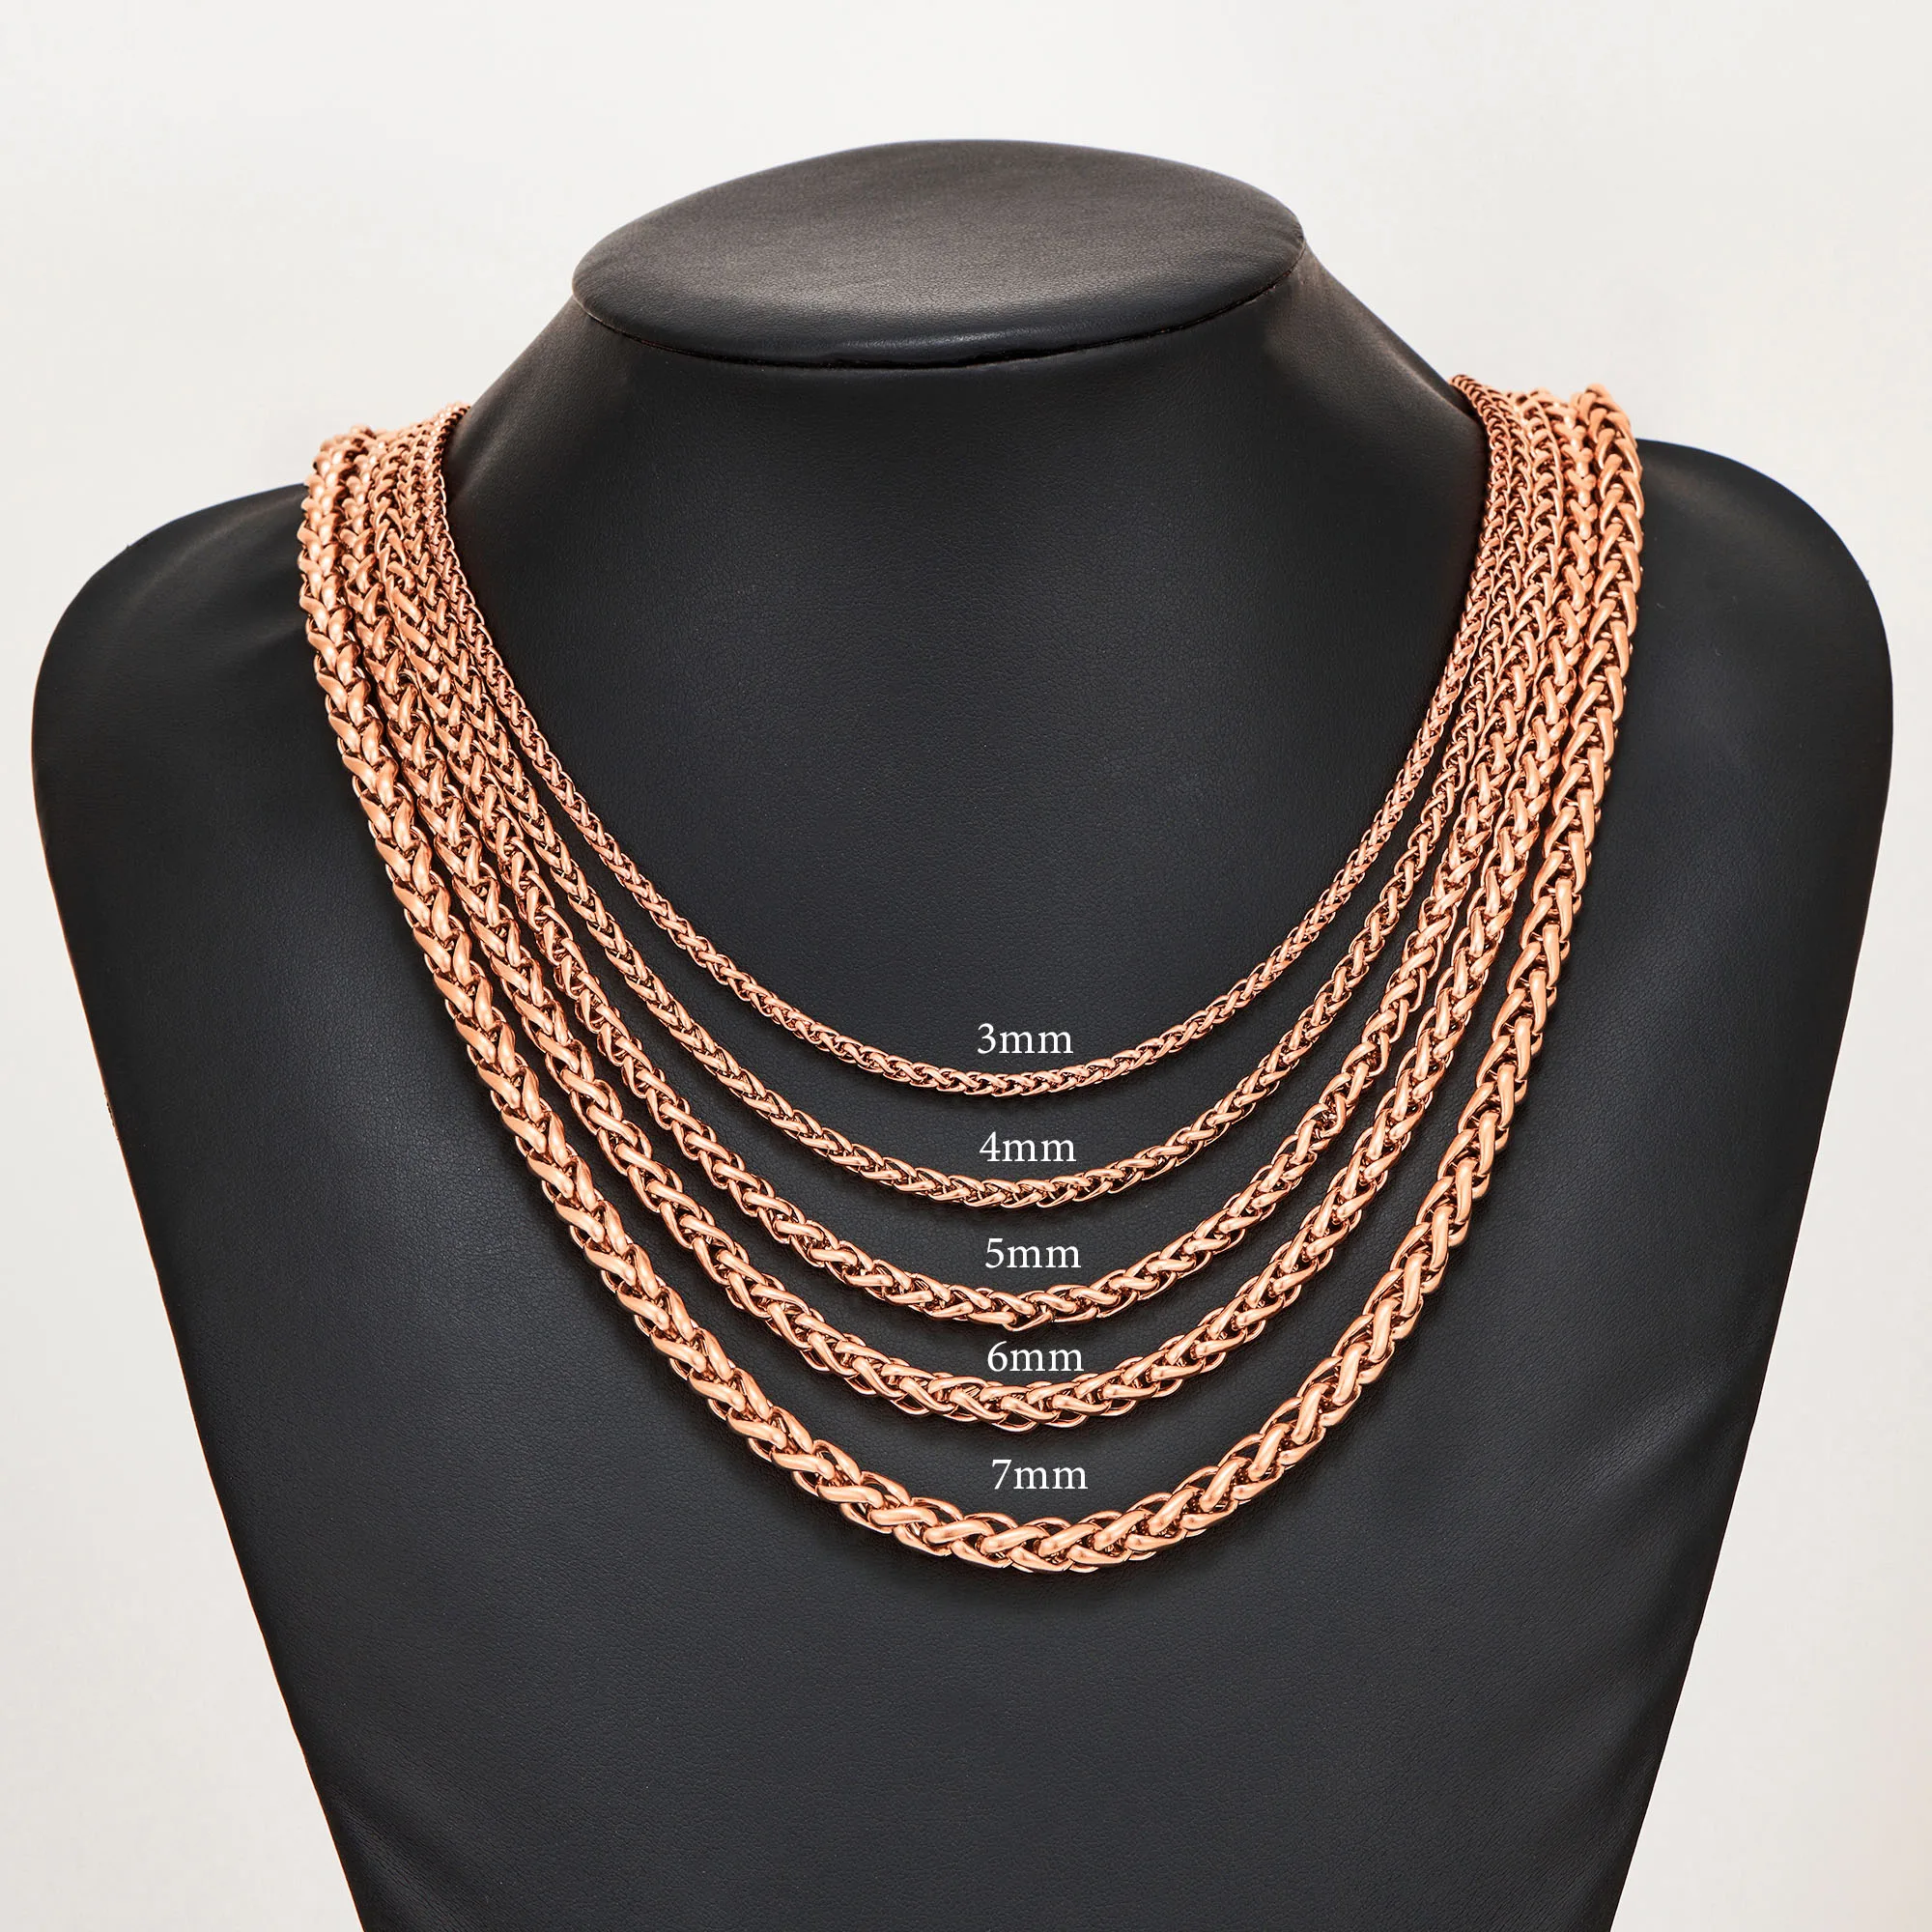 3mm/4mm/5mm/6mm/7mm Rose Gold Color Stainless Steel Wheat Braided Necklace Link Classic Curb Chain for Men Women Jewelry